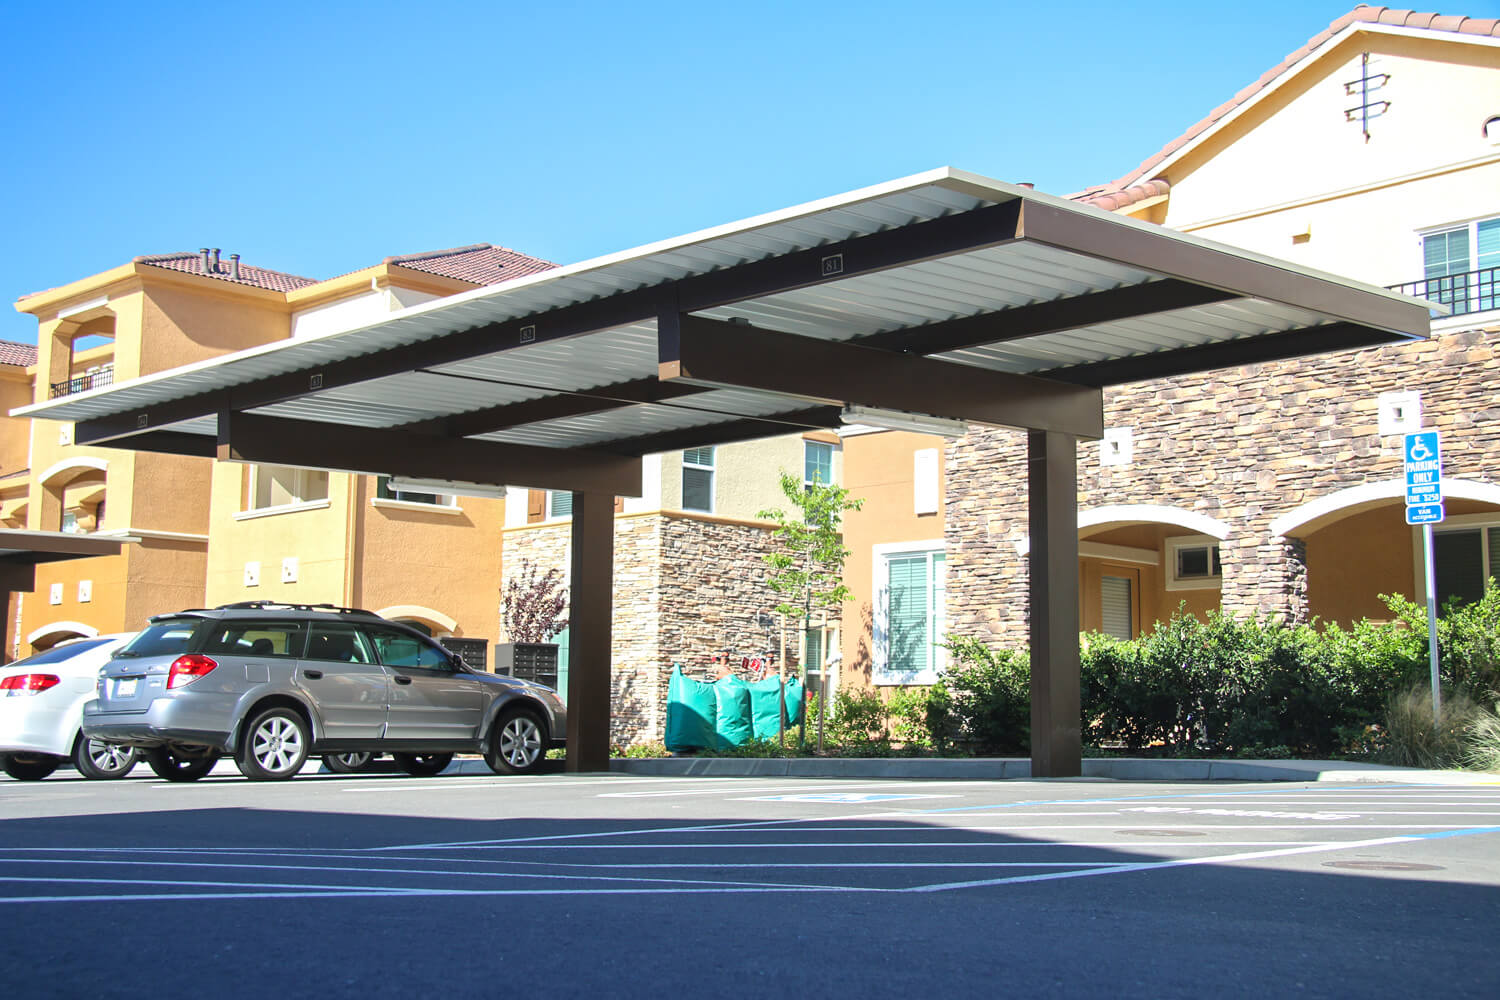 Standard Carports - Baja Carports | Solar Support Systems & Shade Canopies for Commercial ...